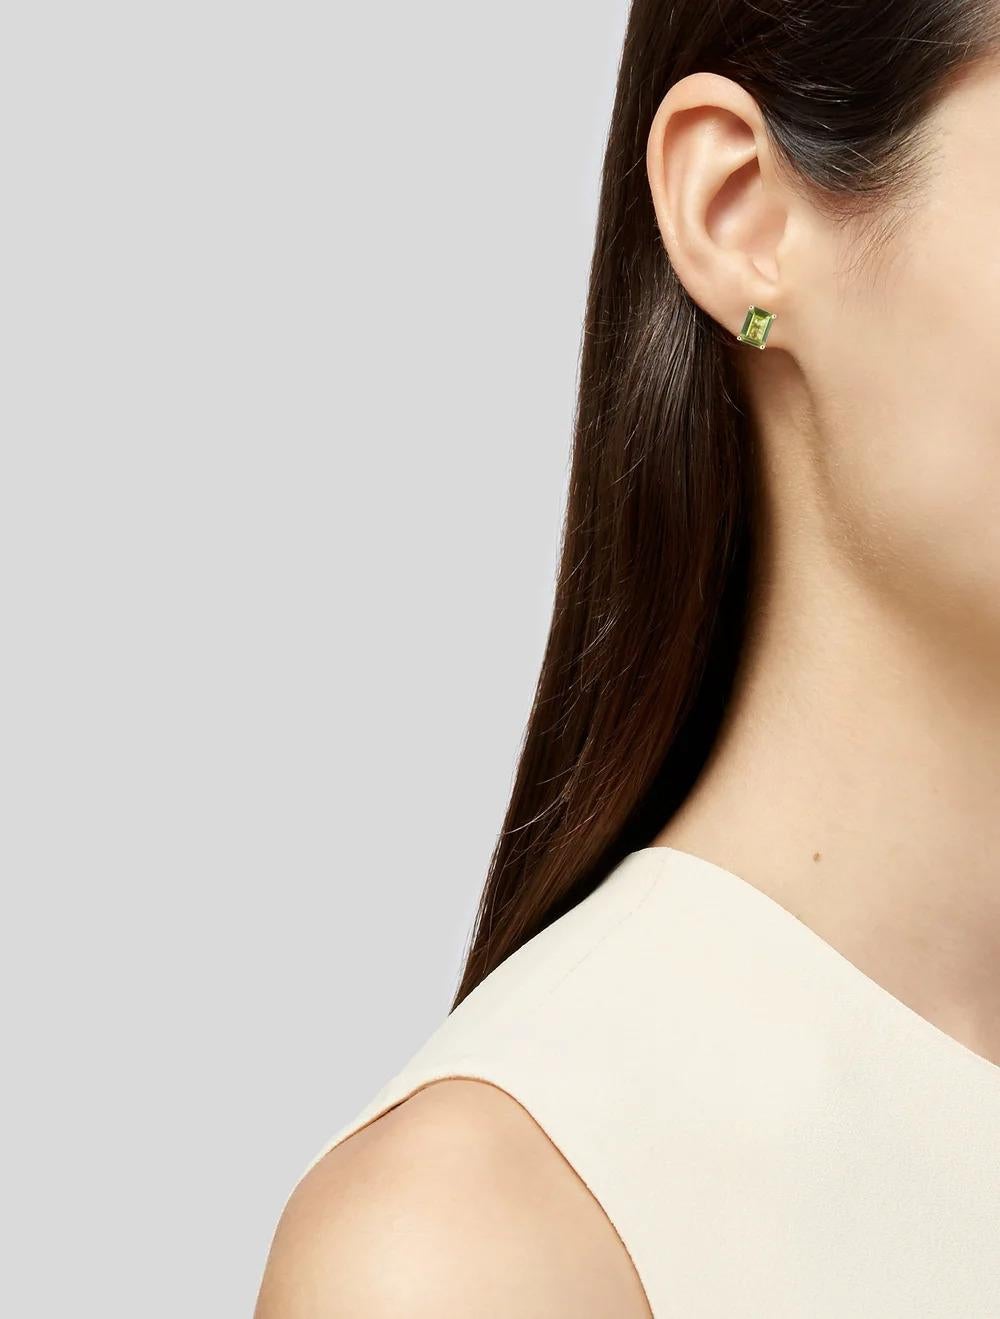 Elevate your style with these stunning 14K Yellow Gold Peridot Stud Earrings, boasting a total carat weight of 2.52. Each earring features a mesmerizing Cut Cornered Rectangular Step Cut Peridot, exuding elegance and